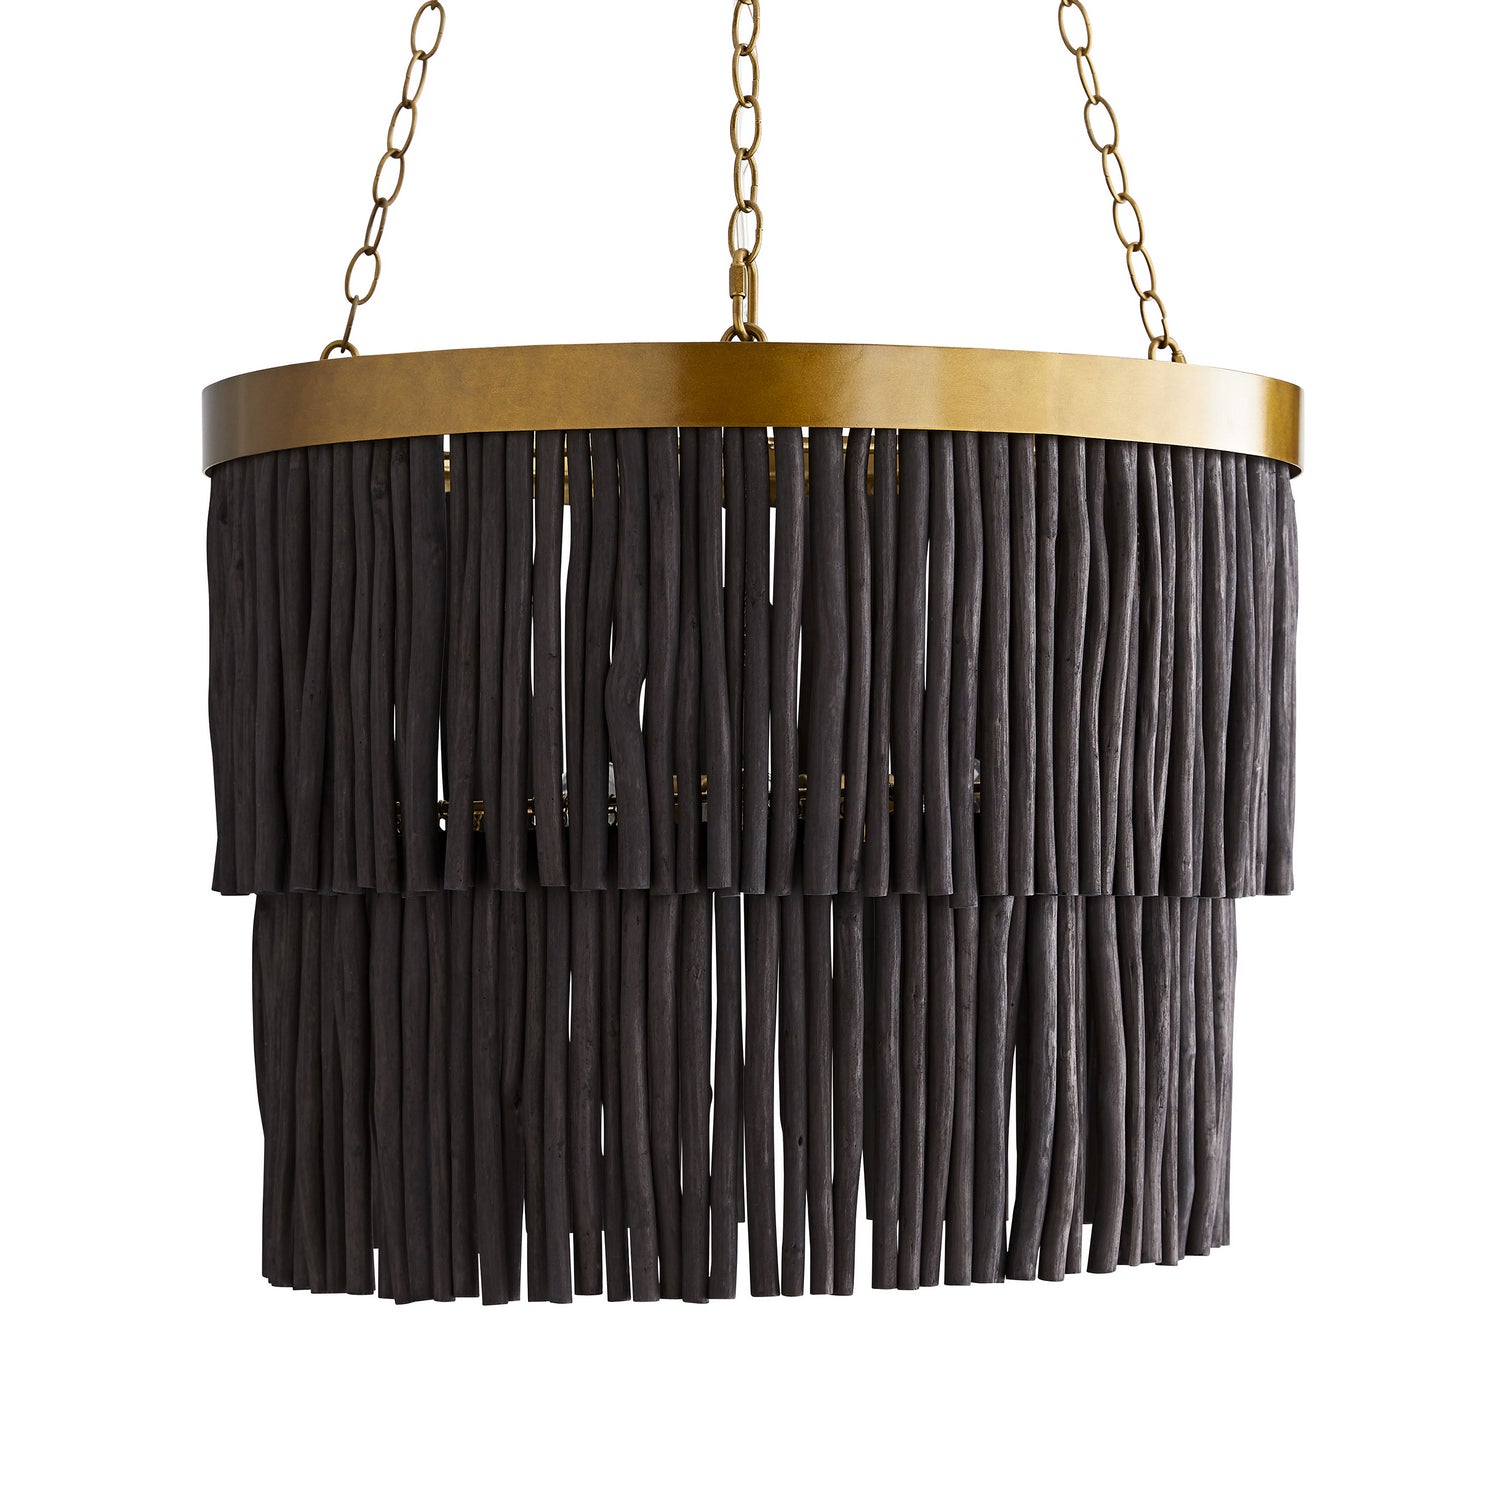 Three Light Pendant from the Arya collection in Antique Brass finish